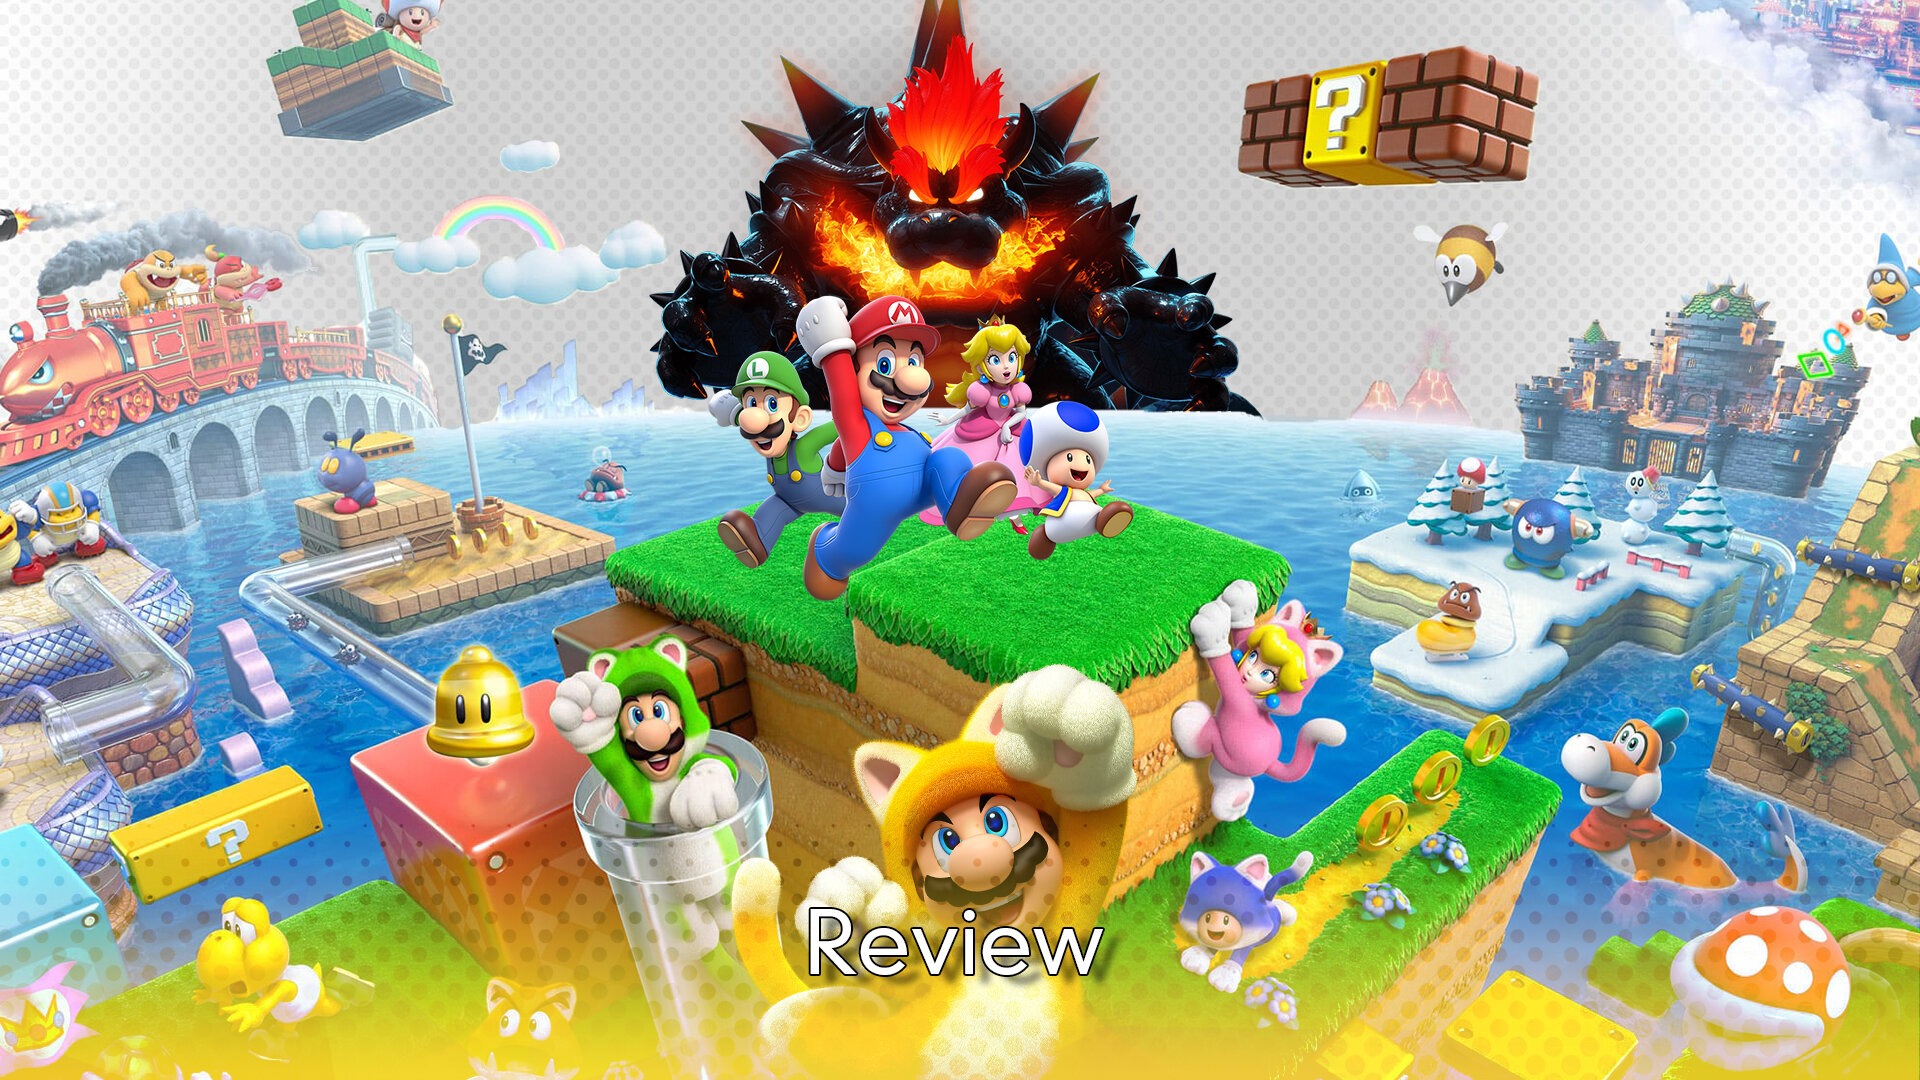 Super Mario 3D World + Bowser's Fury (for Nintendo Switch) Review